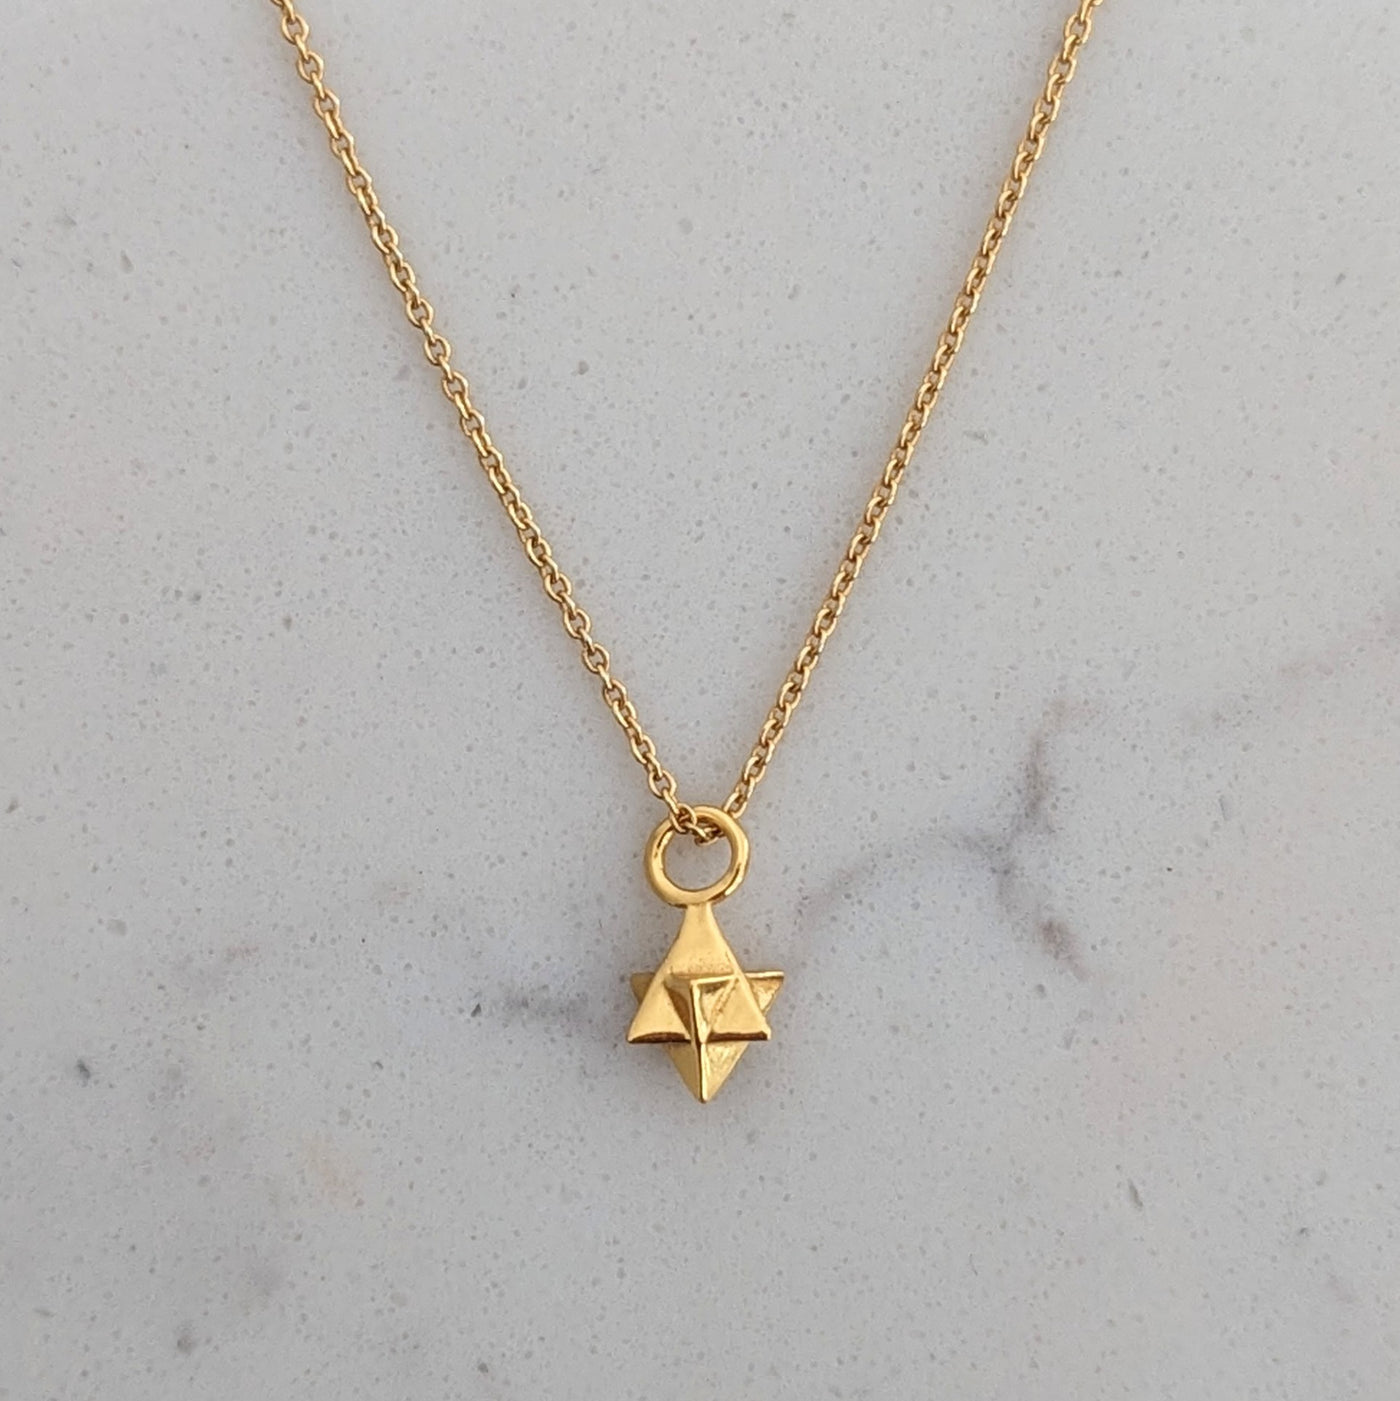 Gold plated tetrahedron necklace